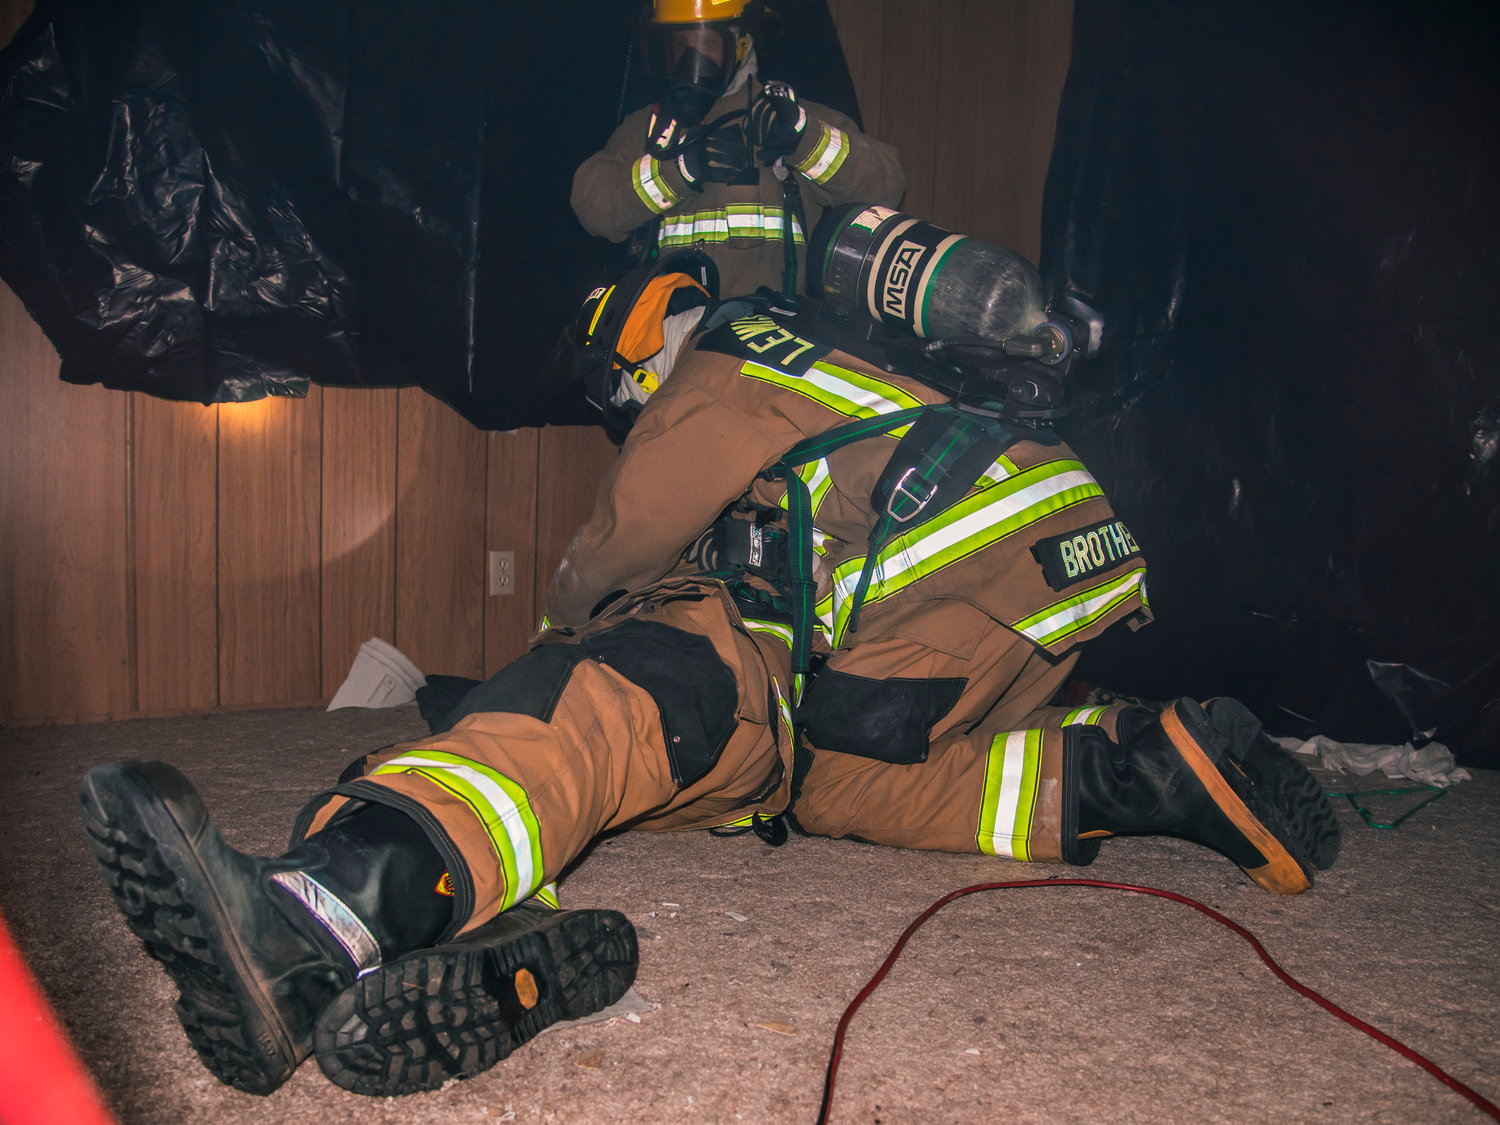 Firefighters trained using a fog machine to help simulate smoke. The building was also darkened to create a more realistic exercise for firefighters.